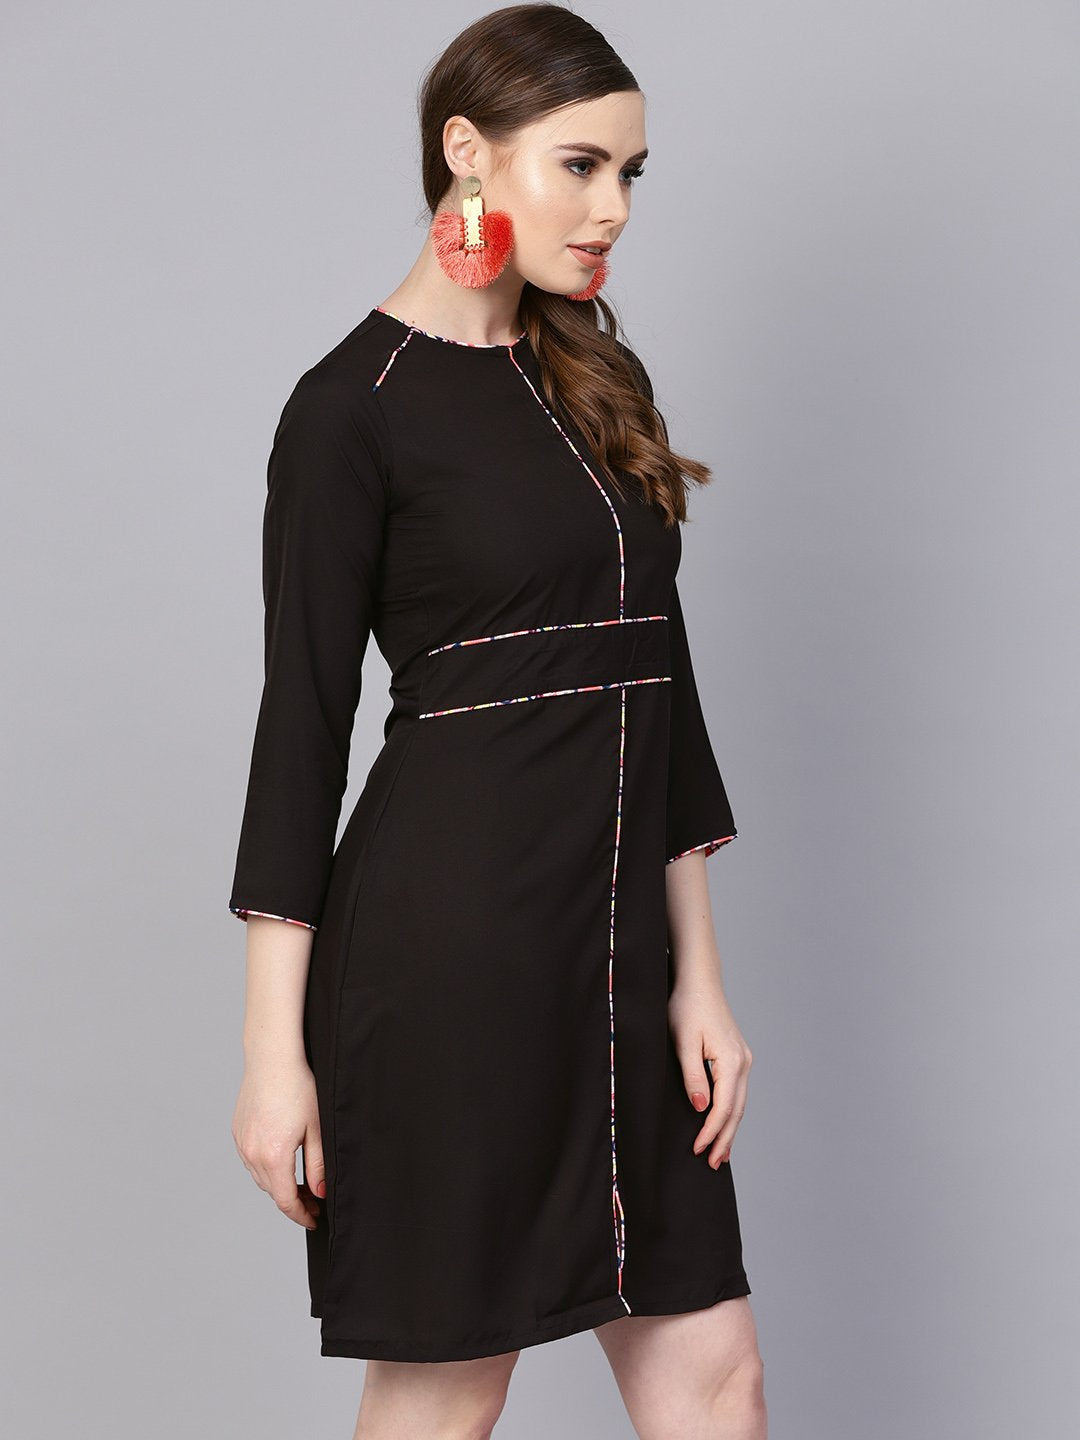 Women's Solid Black Dress With Printed Piping & Round Neck - Nayo Clothing